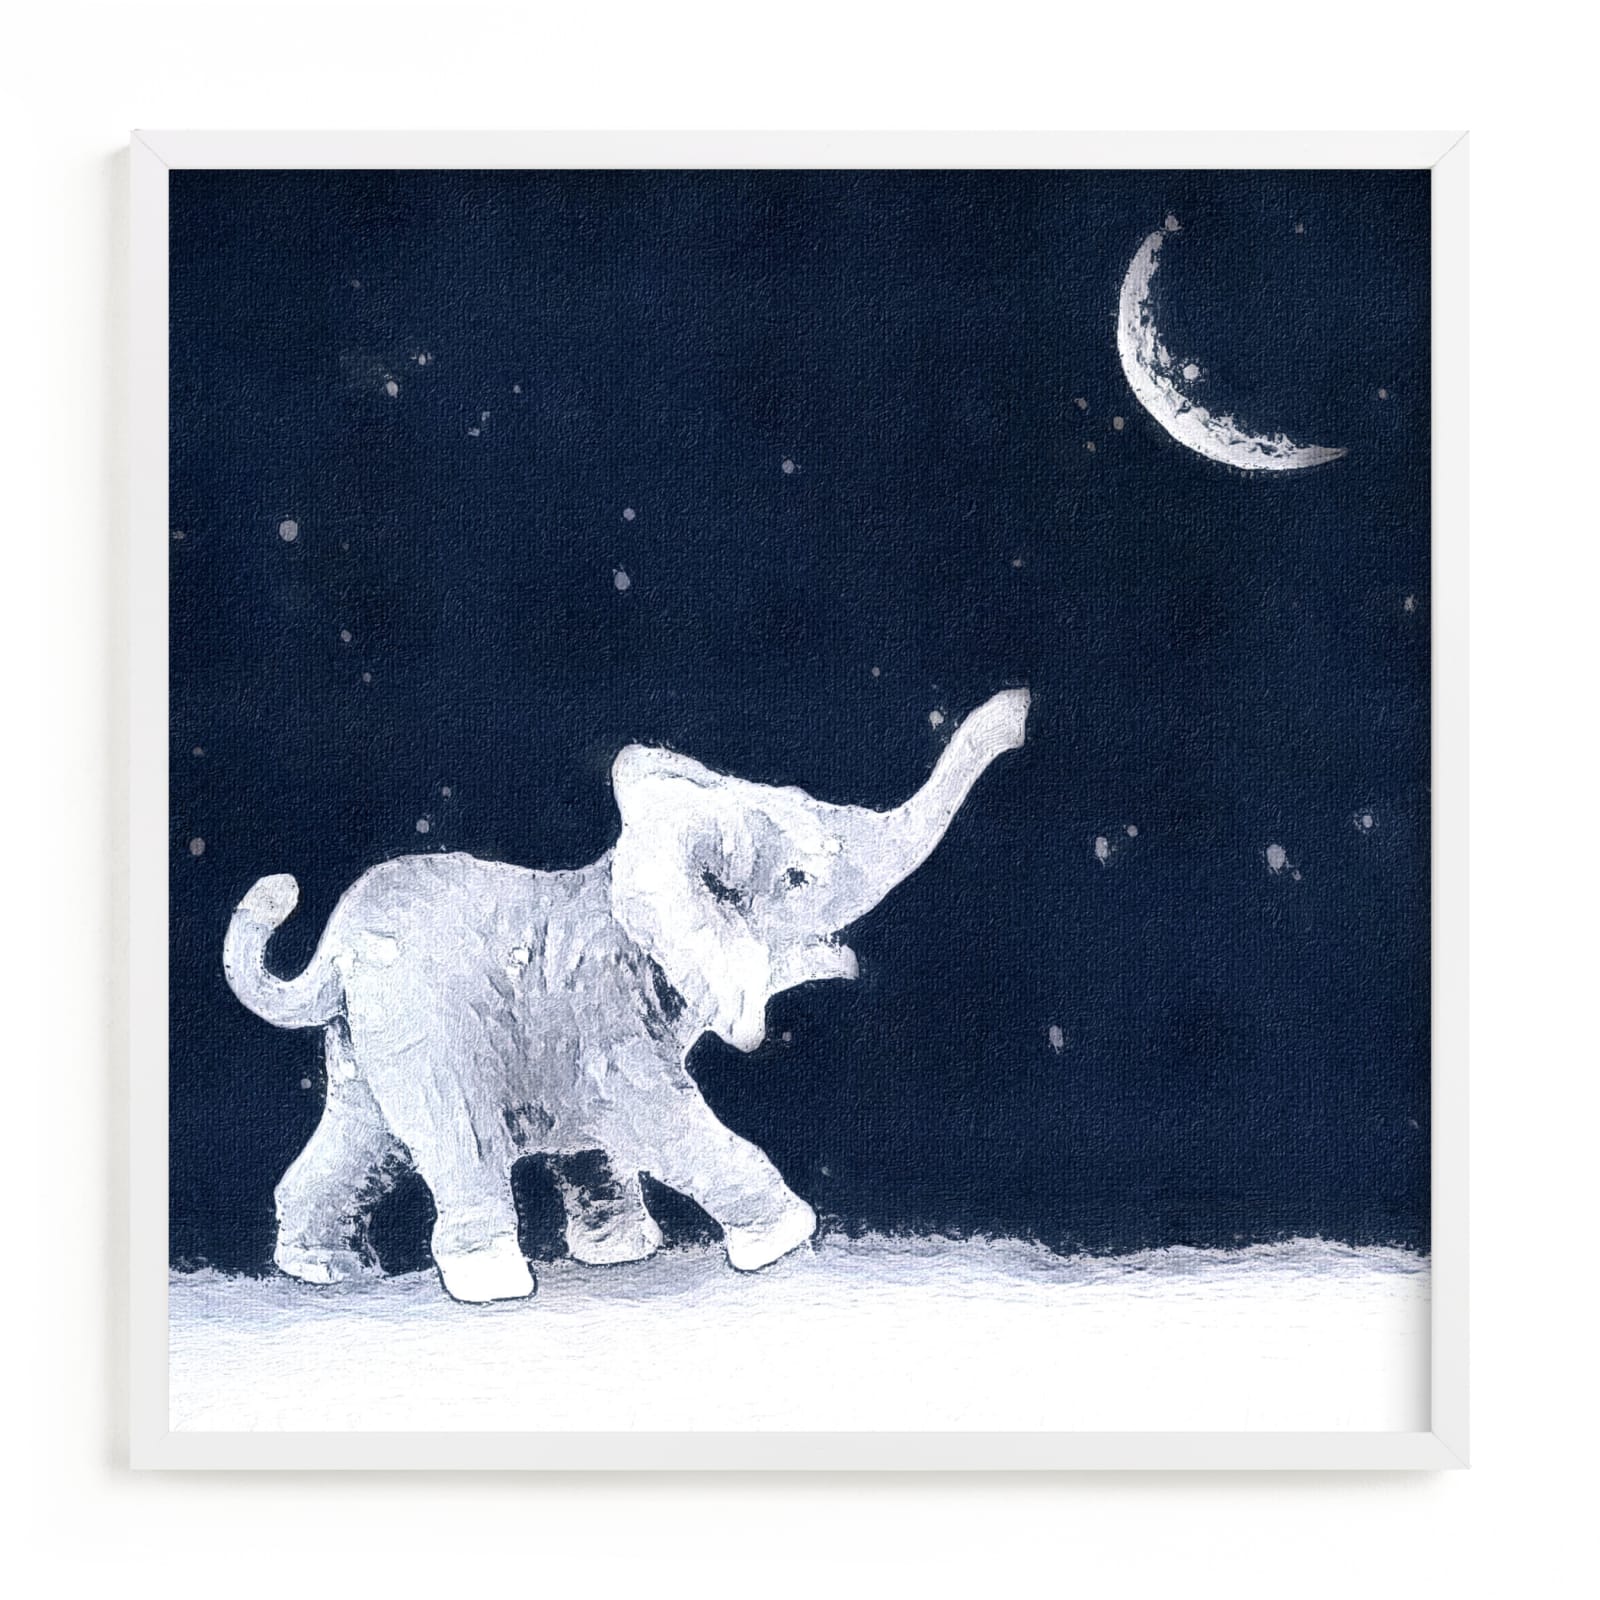 This is a blue kids wall art by Maja Cunningham called Moon Balloon.